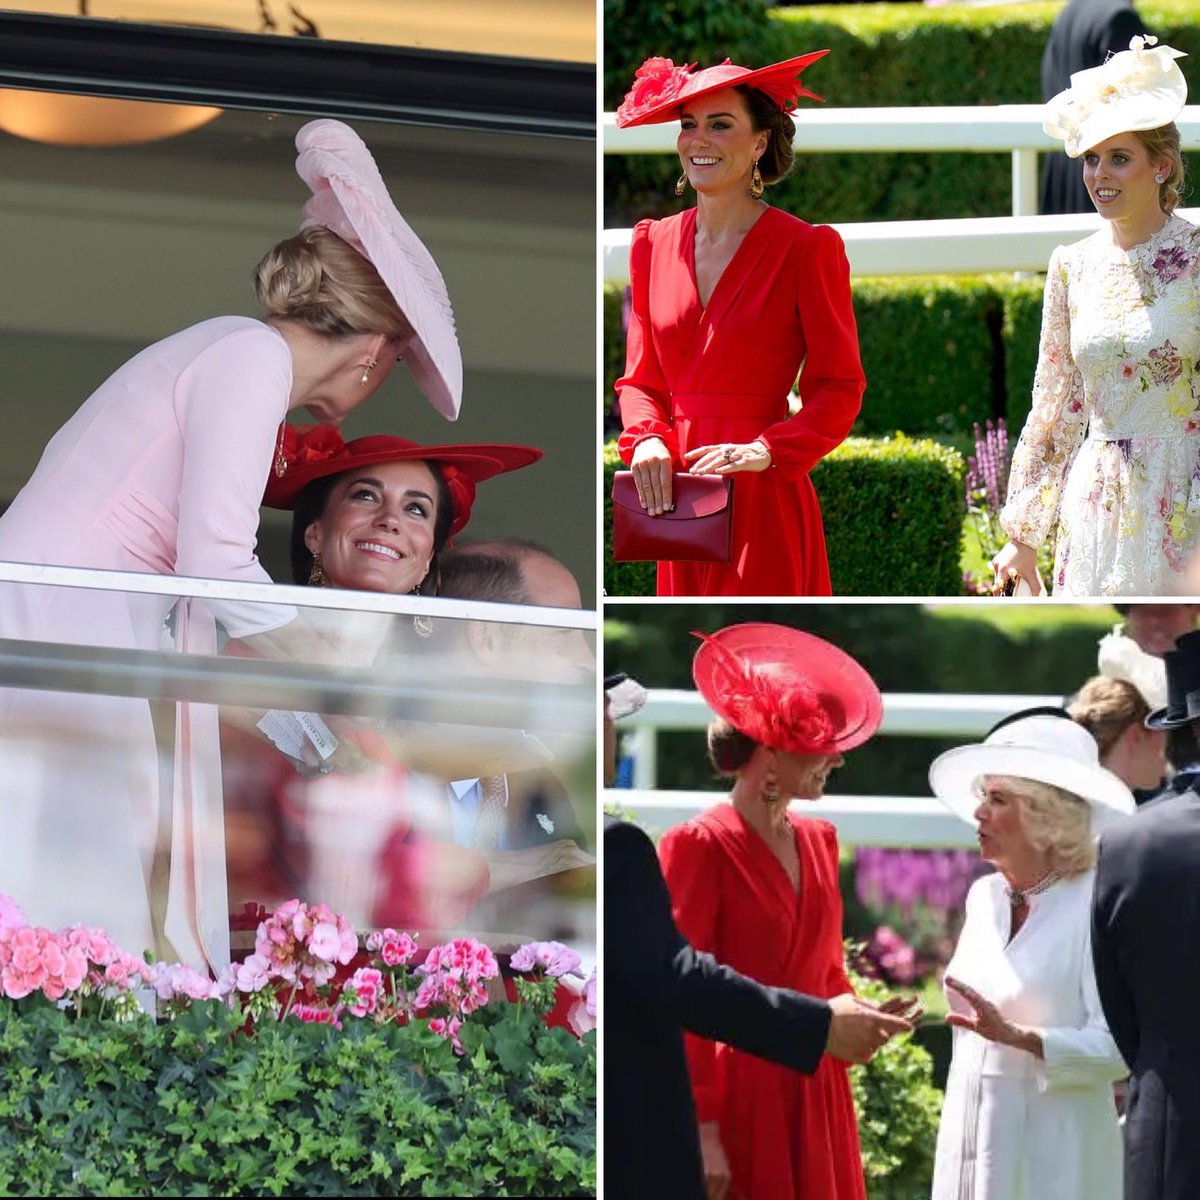 HRH Princess of Wales with HRH Duchess of Edinburgh, HRH Princess Beatrice and HM The Queen Consort.
The royal ladies look fabulous! 
🩷❤️💜🤍

#PrincessofWales #DuchessofEdinburgh #QueenConsort #PrincessBeatrice 
#RoyalAscot